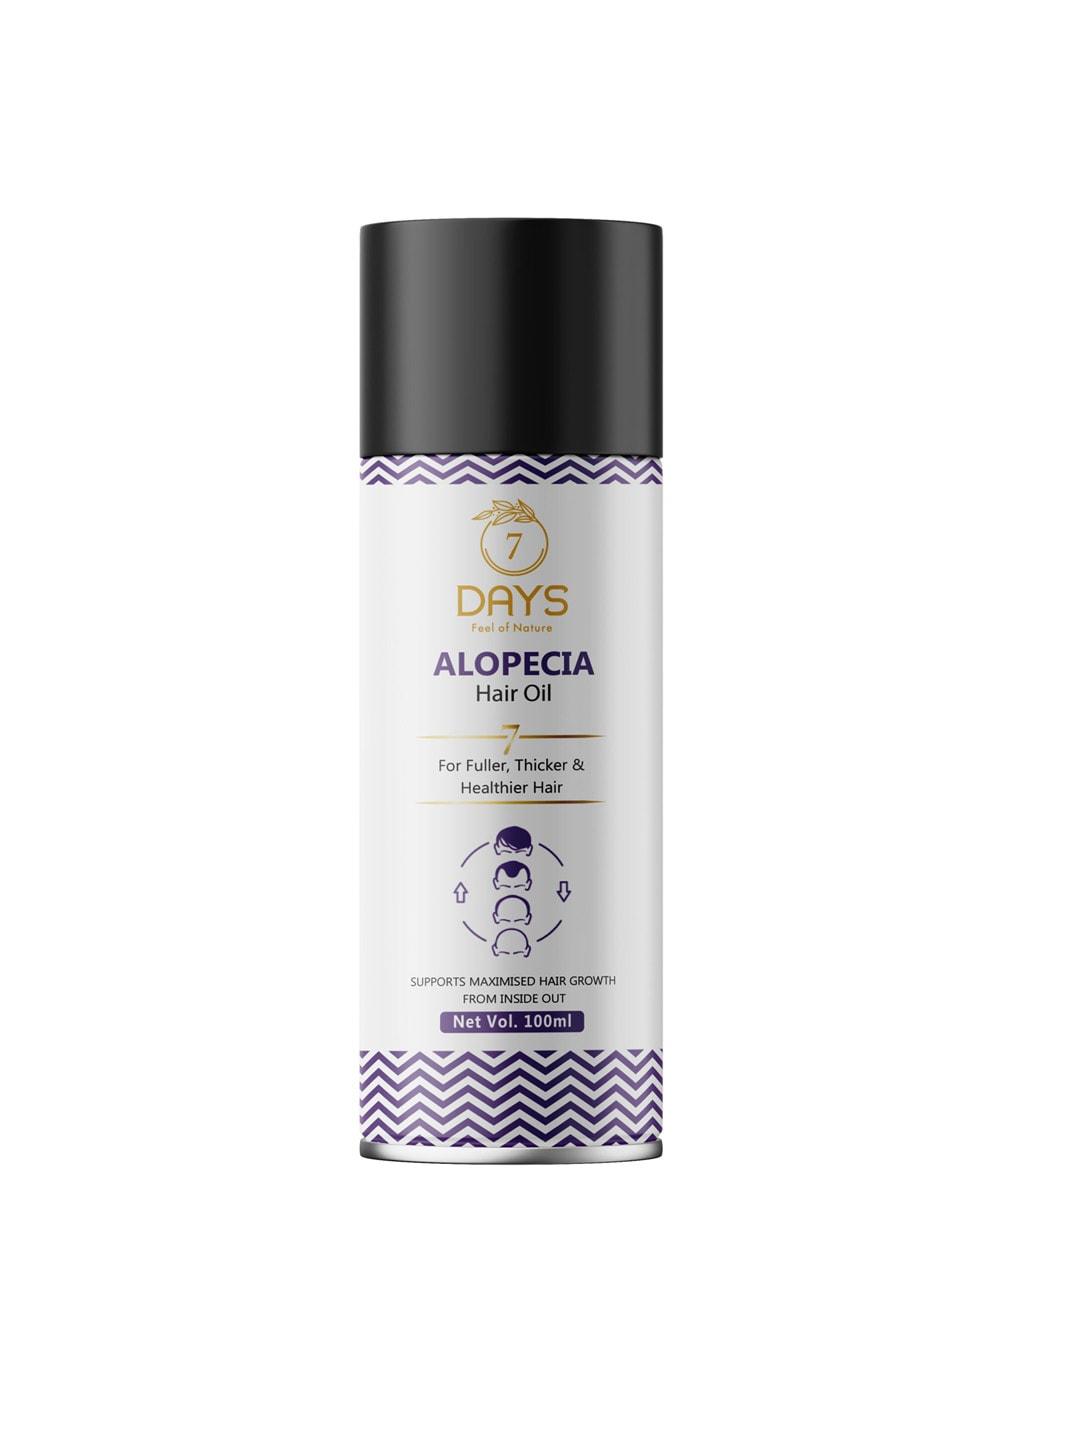 7 DAYS Alopecia Hair Oil For Fuller Thicker & Healthier Hair To Support Hair Growth- 100ml